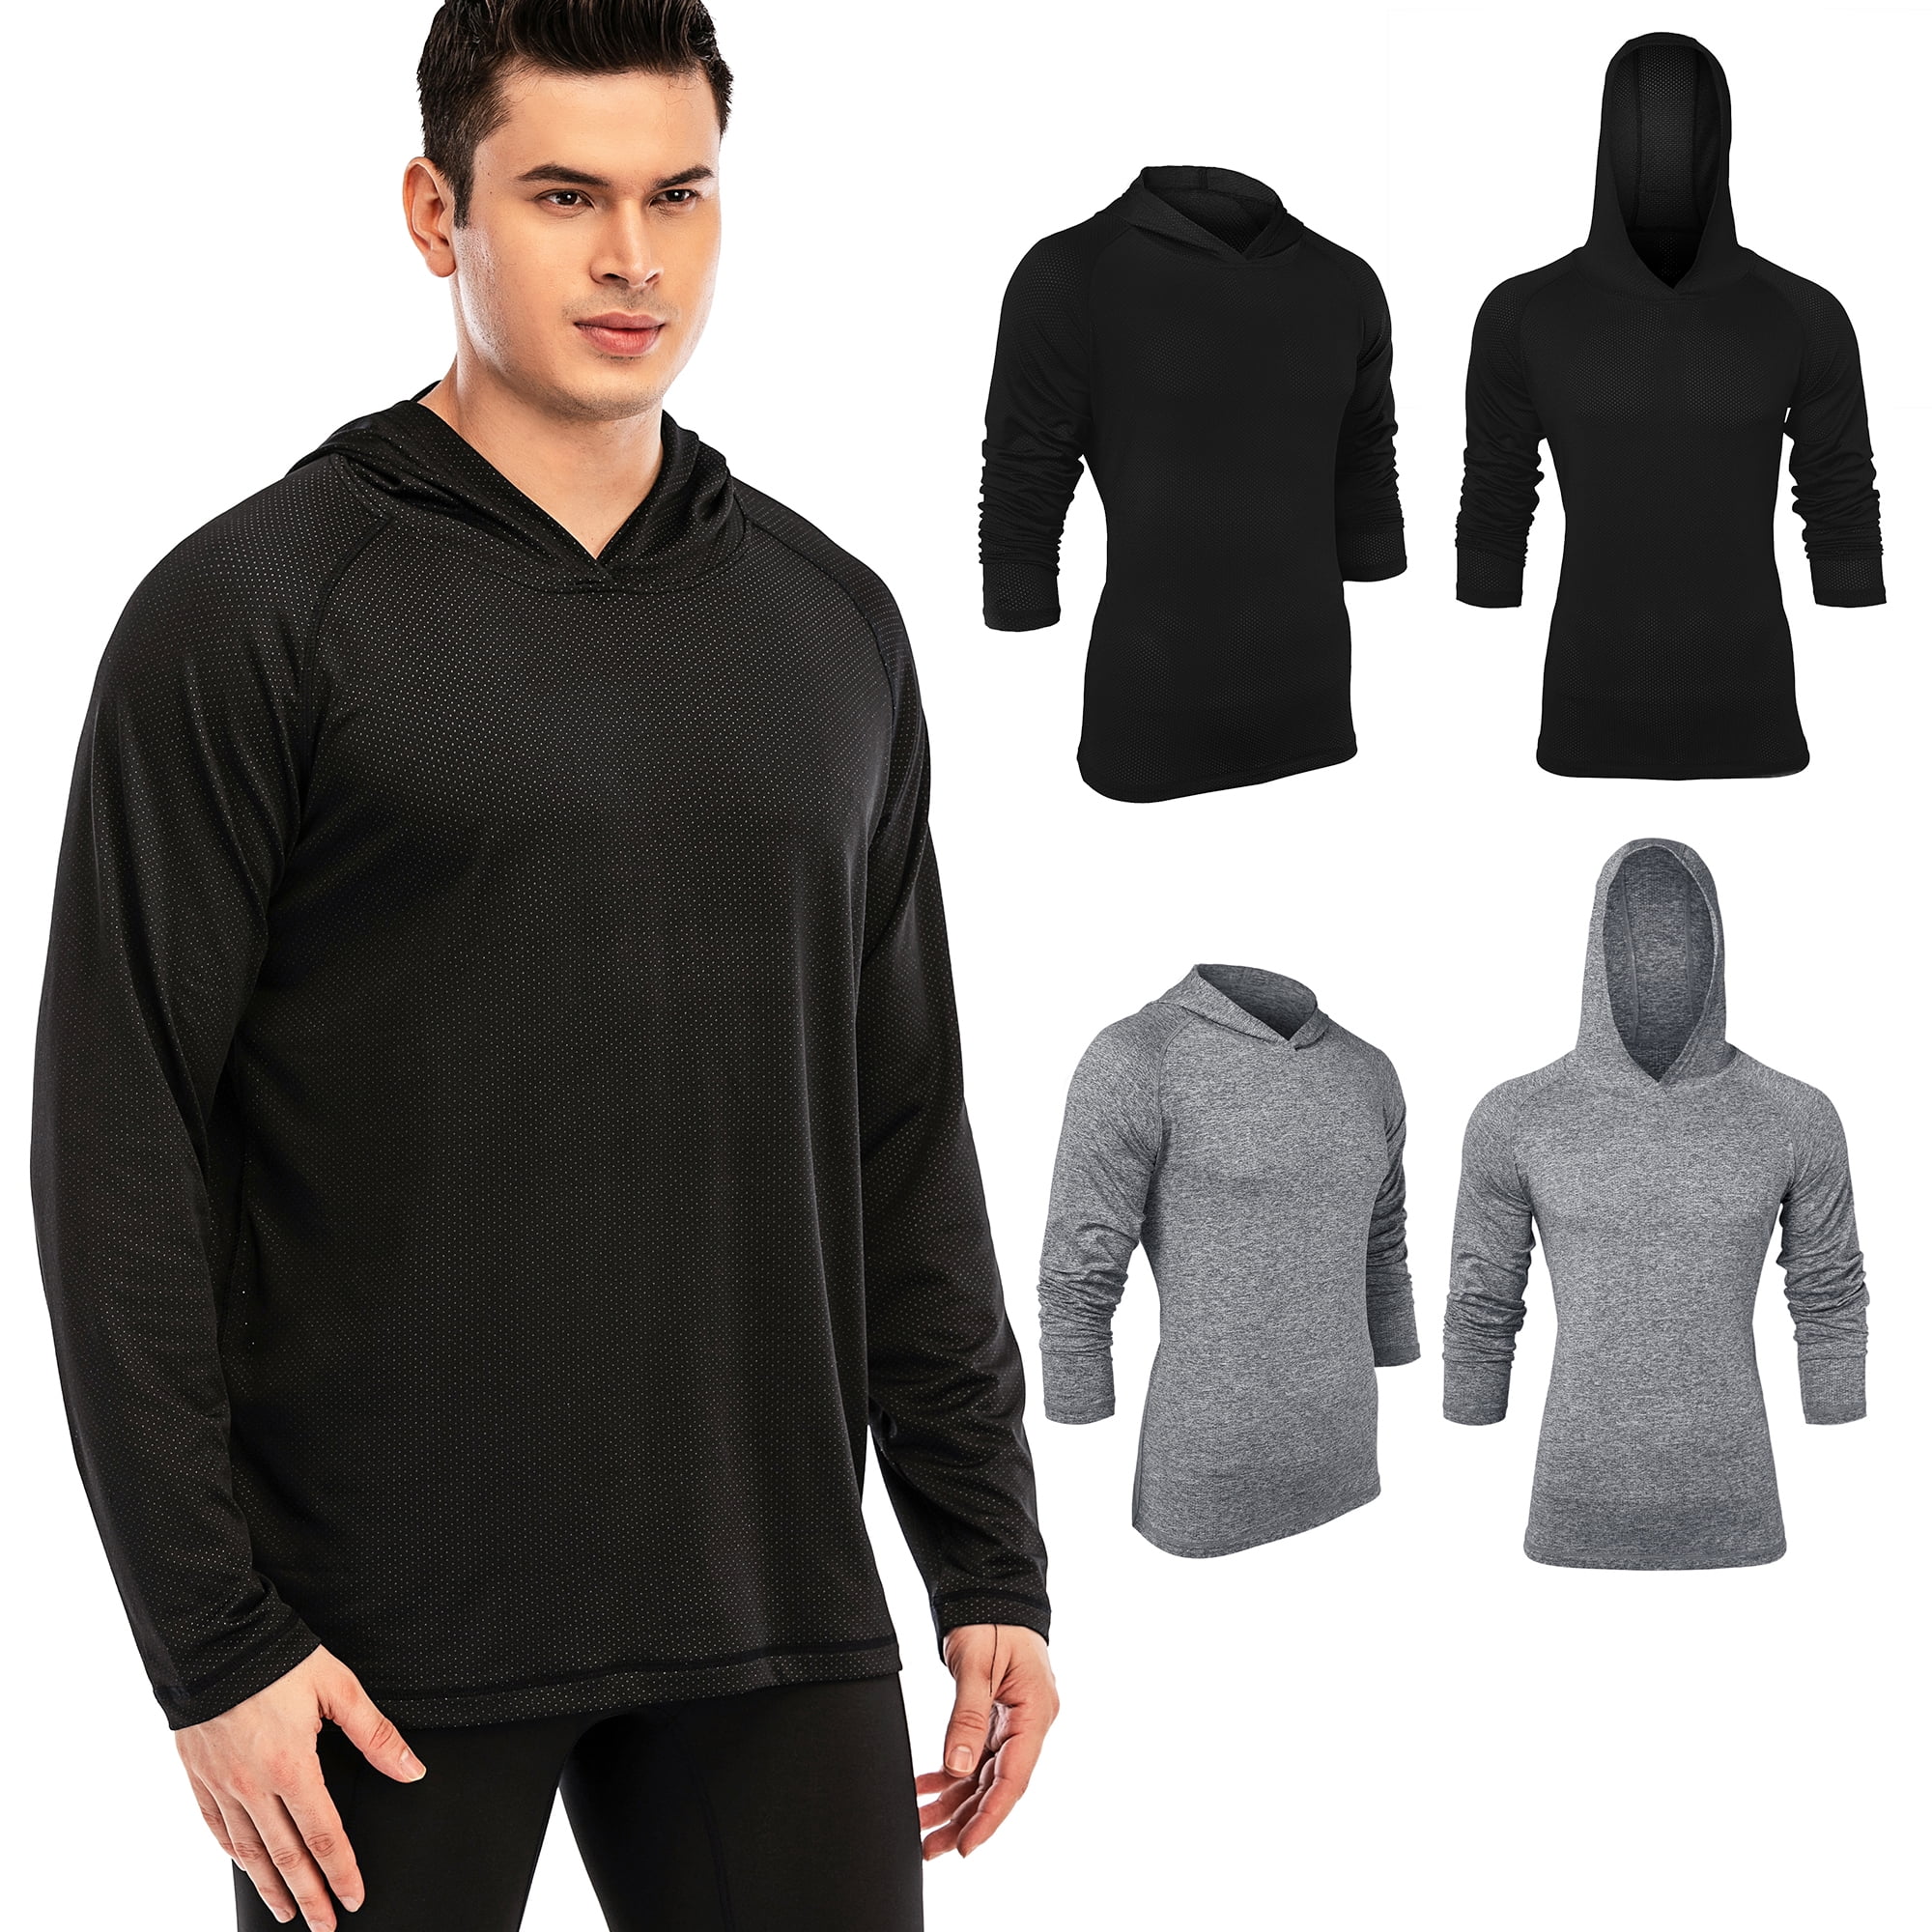 Outdoor T Shirts SPATA Men Long Sleeve Breathable Hooded Quick Dry